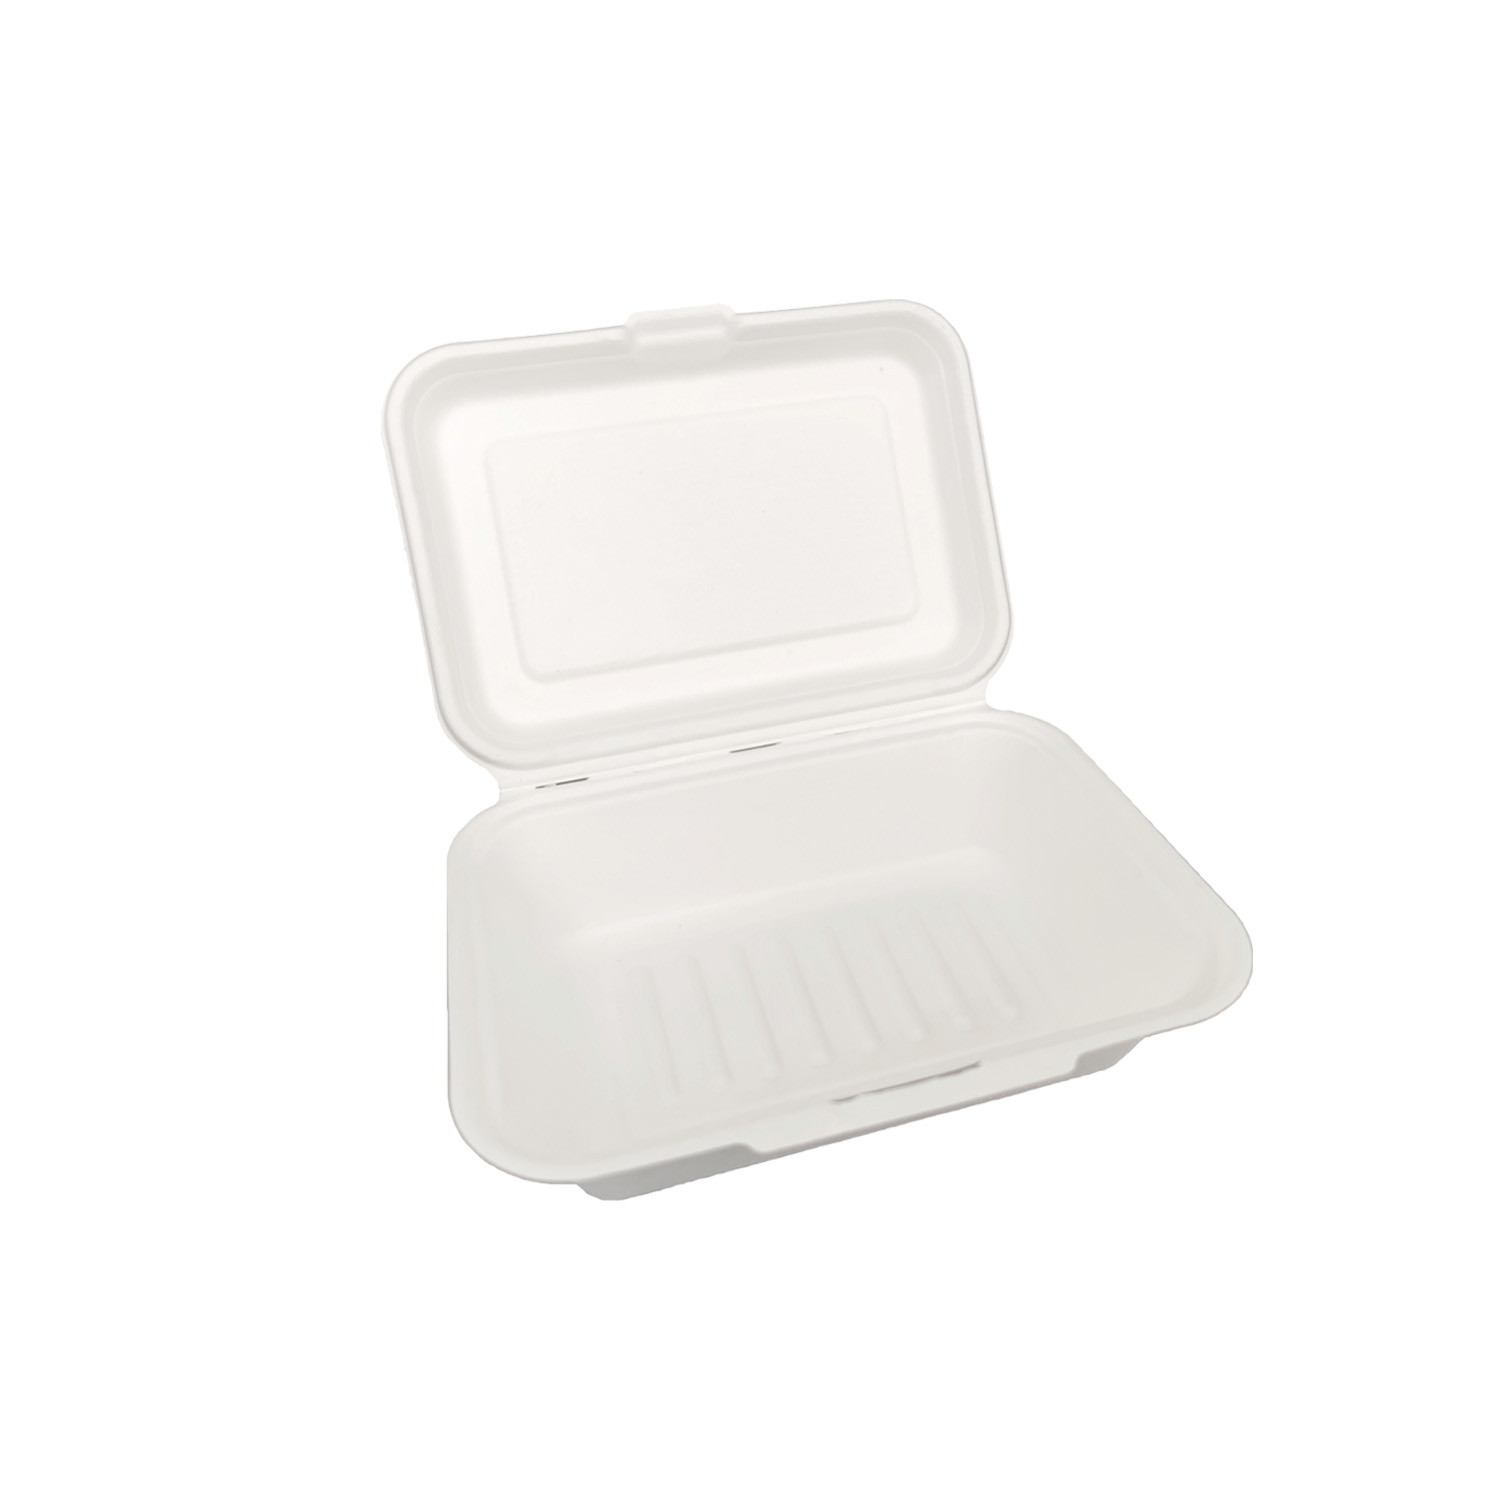 5 oz. (150 ml) Clear PP Plastic Takeout Container, M Lid